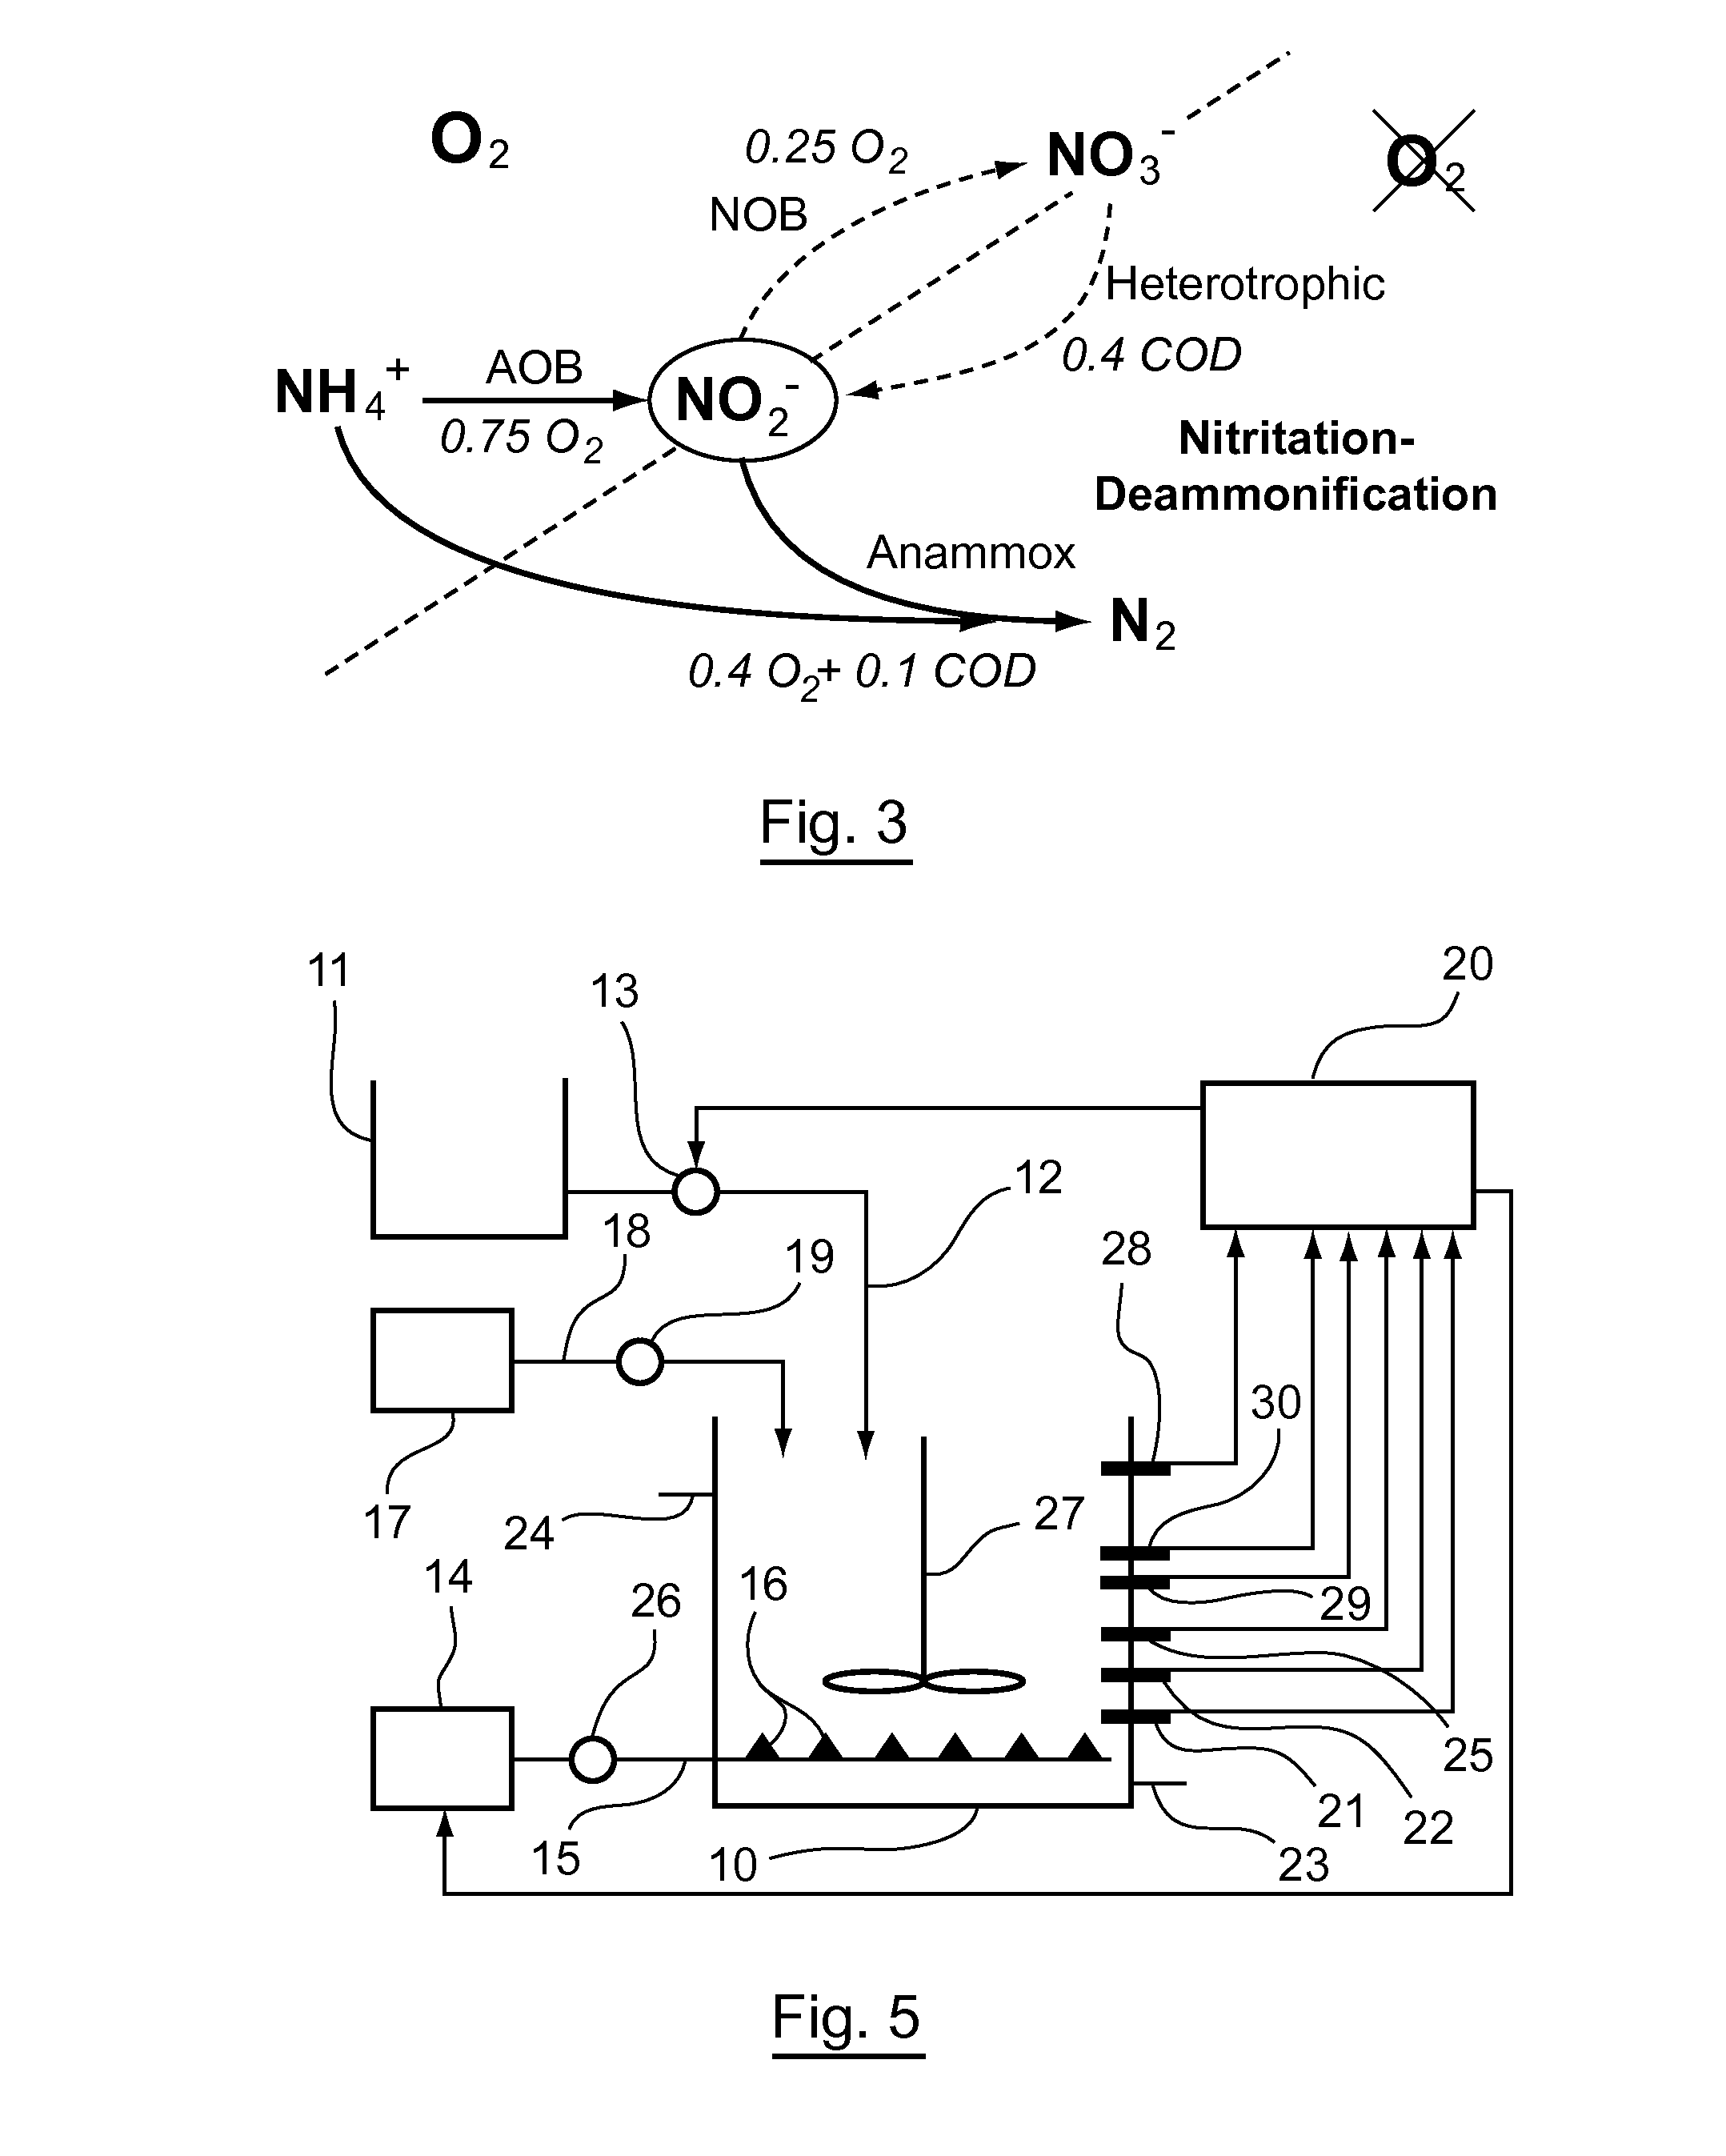 Method for Treating Water Within a Sequencing Batch Reactor, Including an In-Line Measurement of the Nitrite Concentration